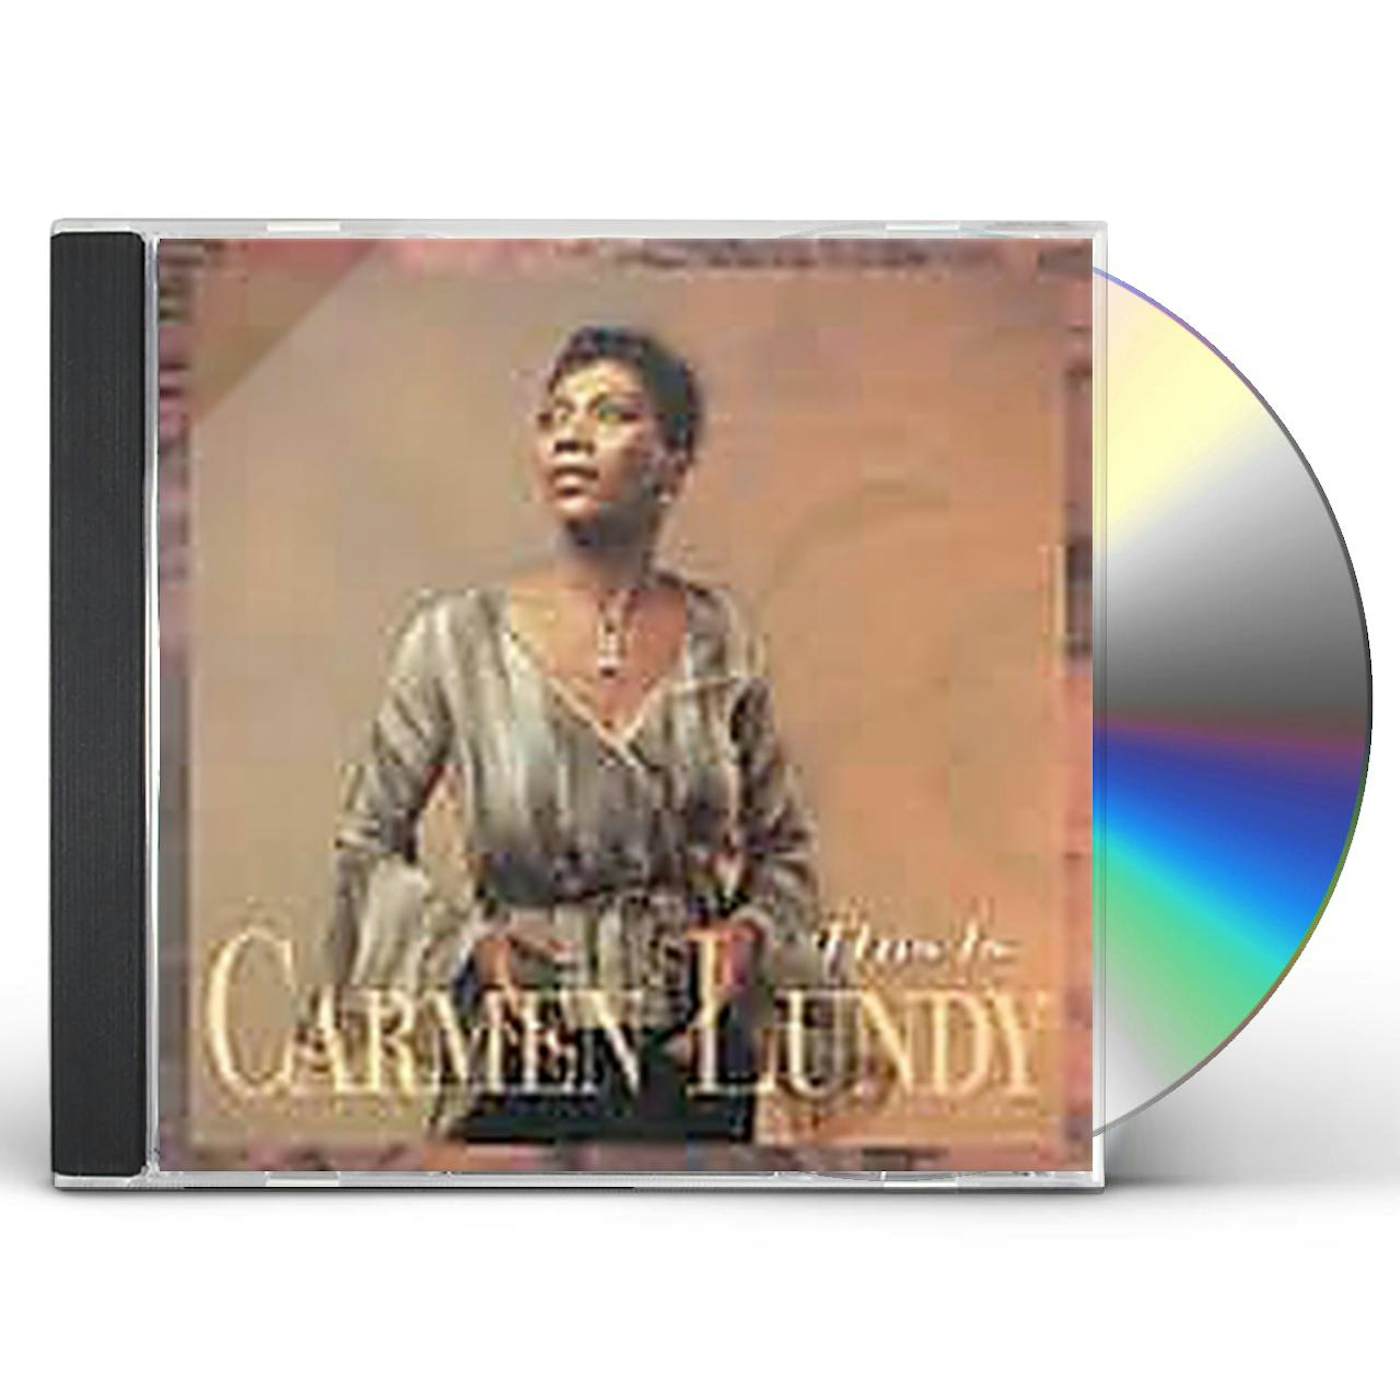 THIS IS CARMEN LUNDY CD